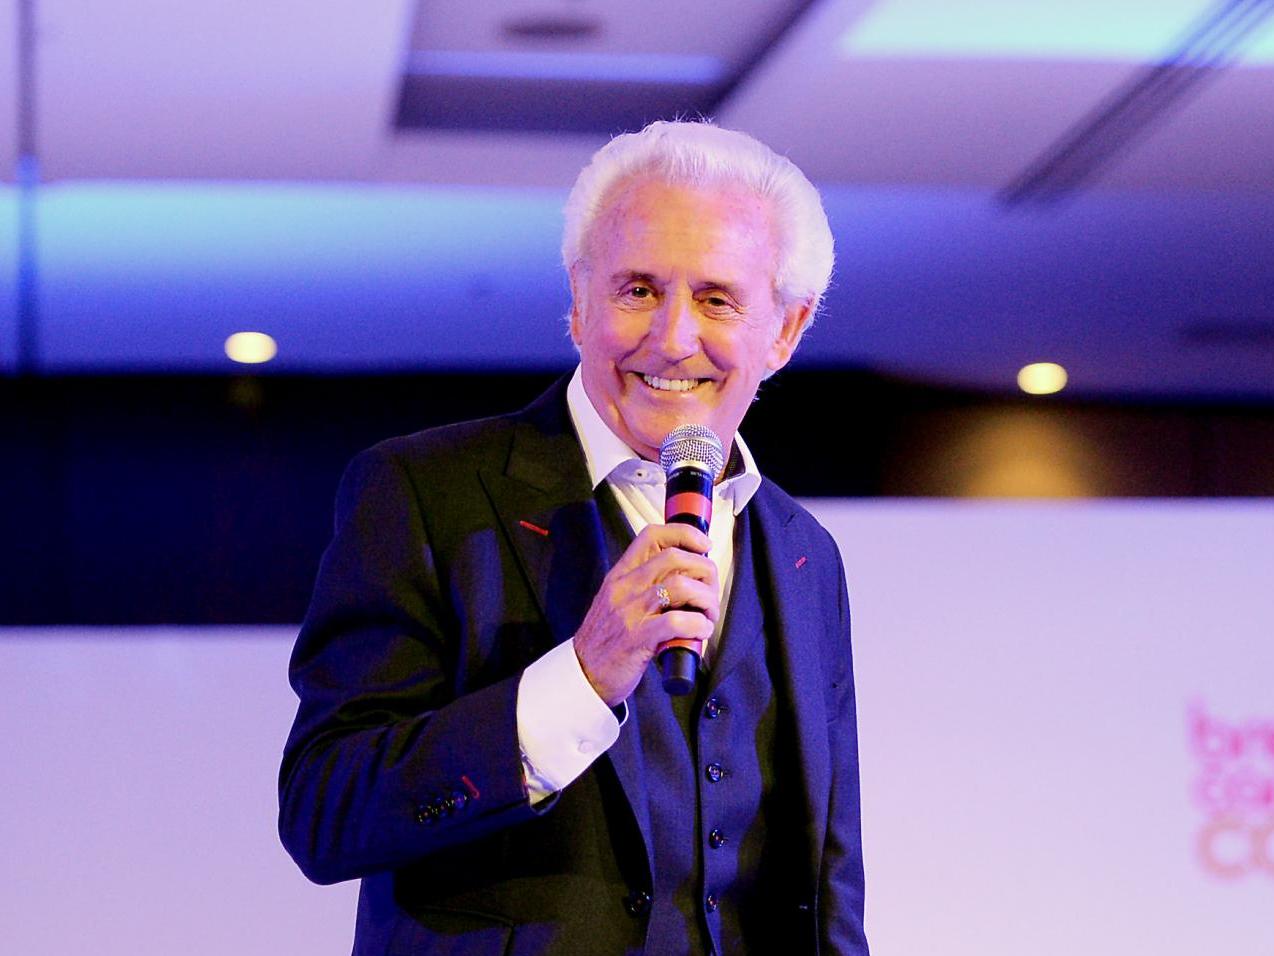 Singer Tony Christie performs at a charity event in 2017